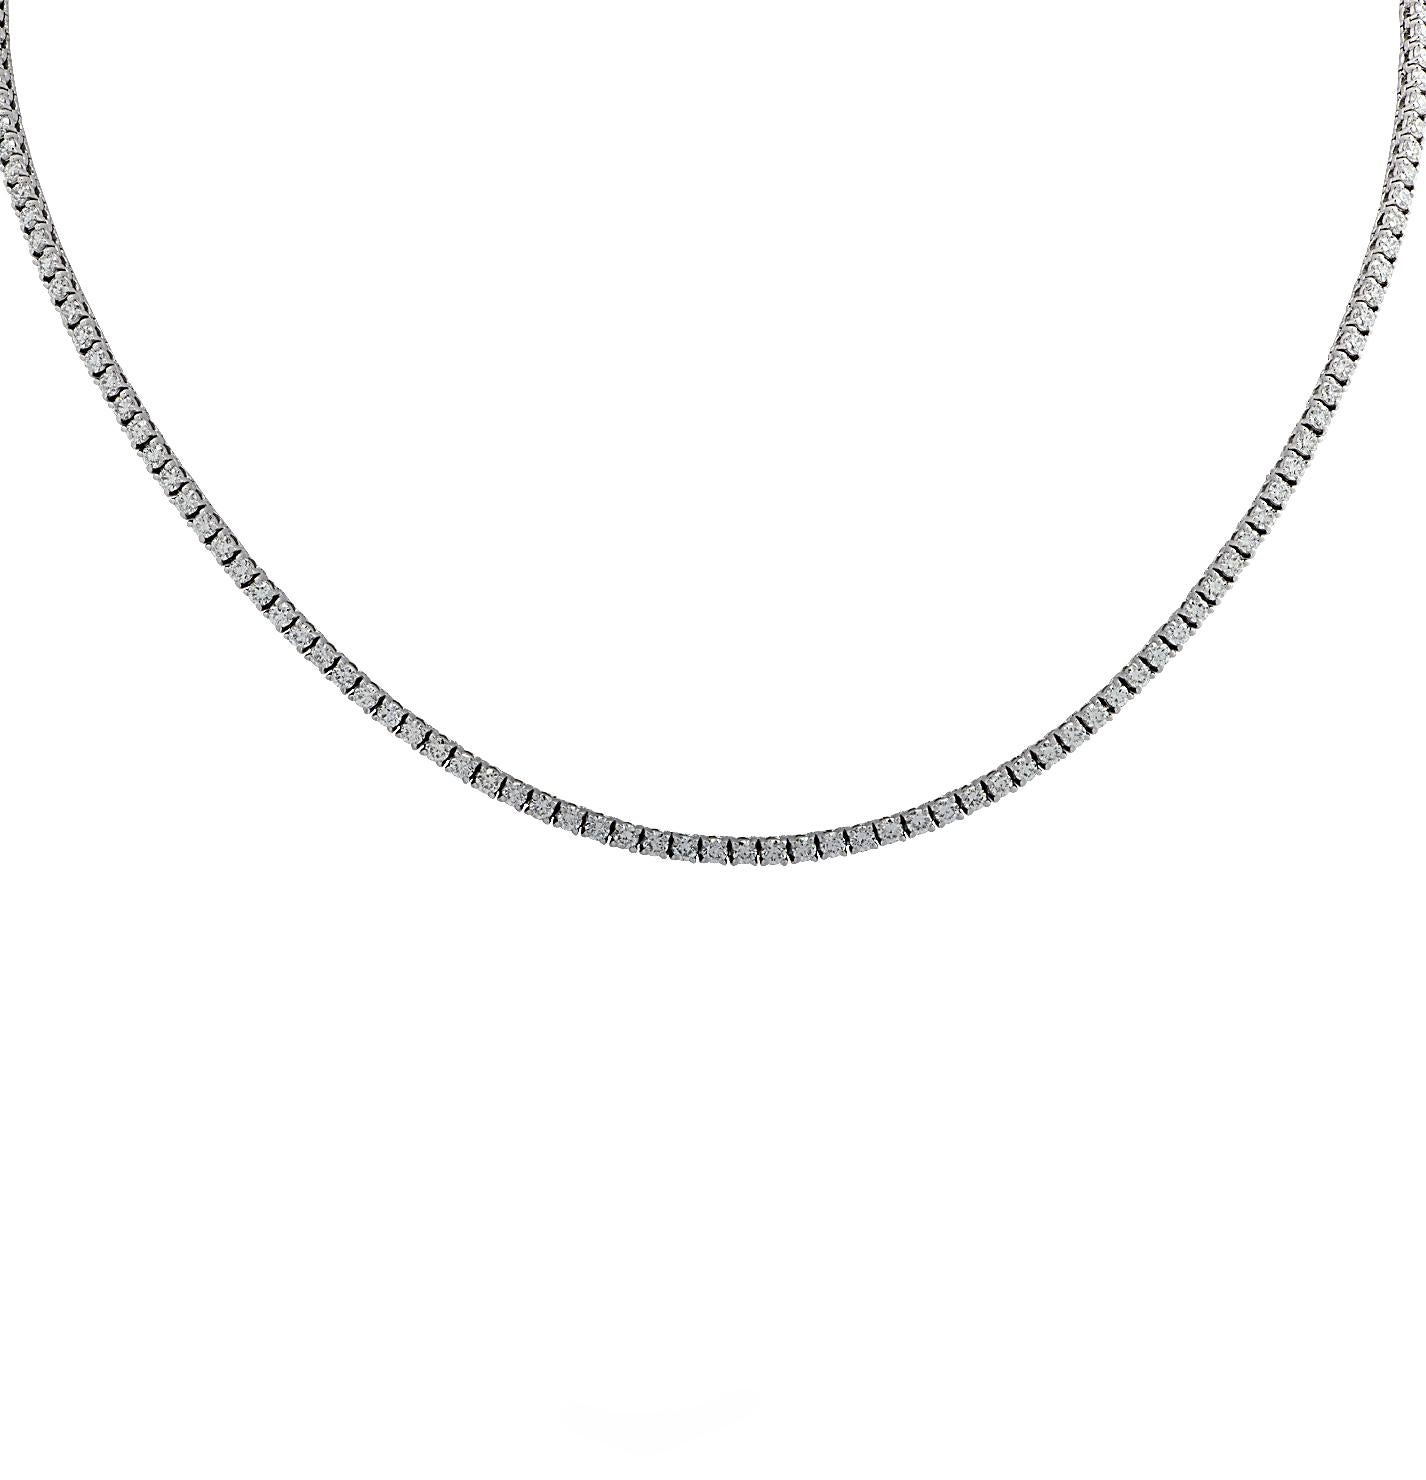 Exquisite Vivid Diamonds straight line diamond necklace crafted in White Gold, showcasing 172 round brilliant cut diamonds weighing 5.85 carats, F-G color, VS-SI Clarity. Each diamond was carefully selected, perfectly matched and set in a seamless